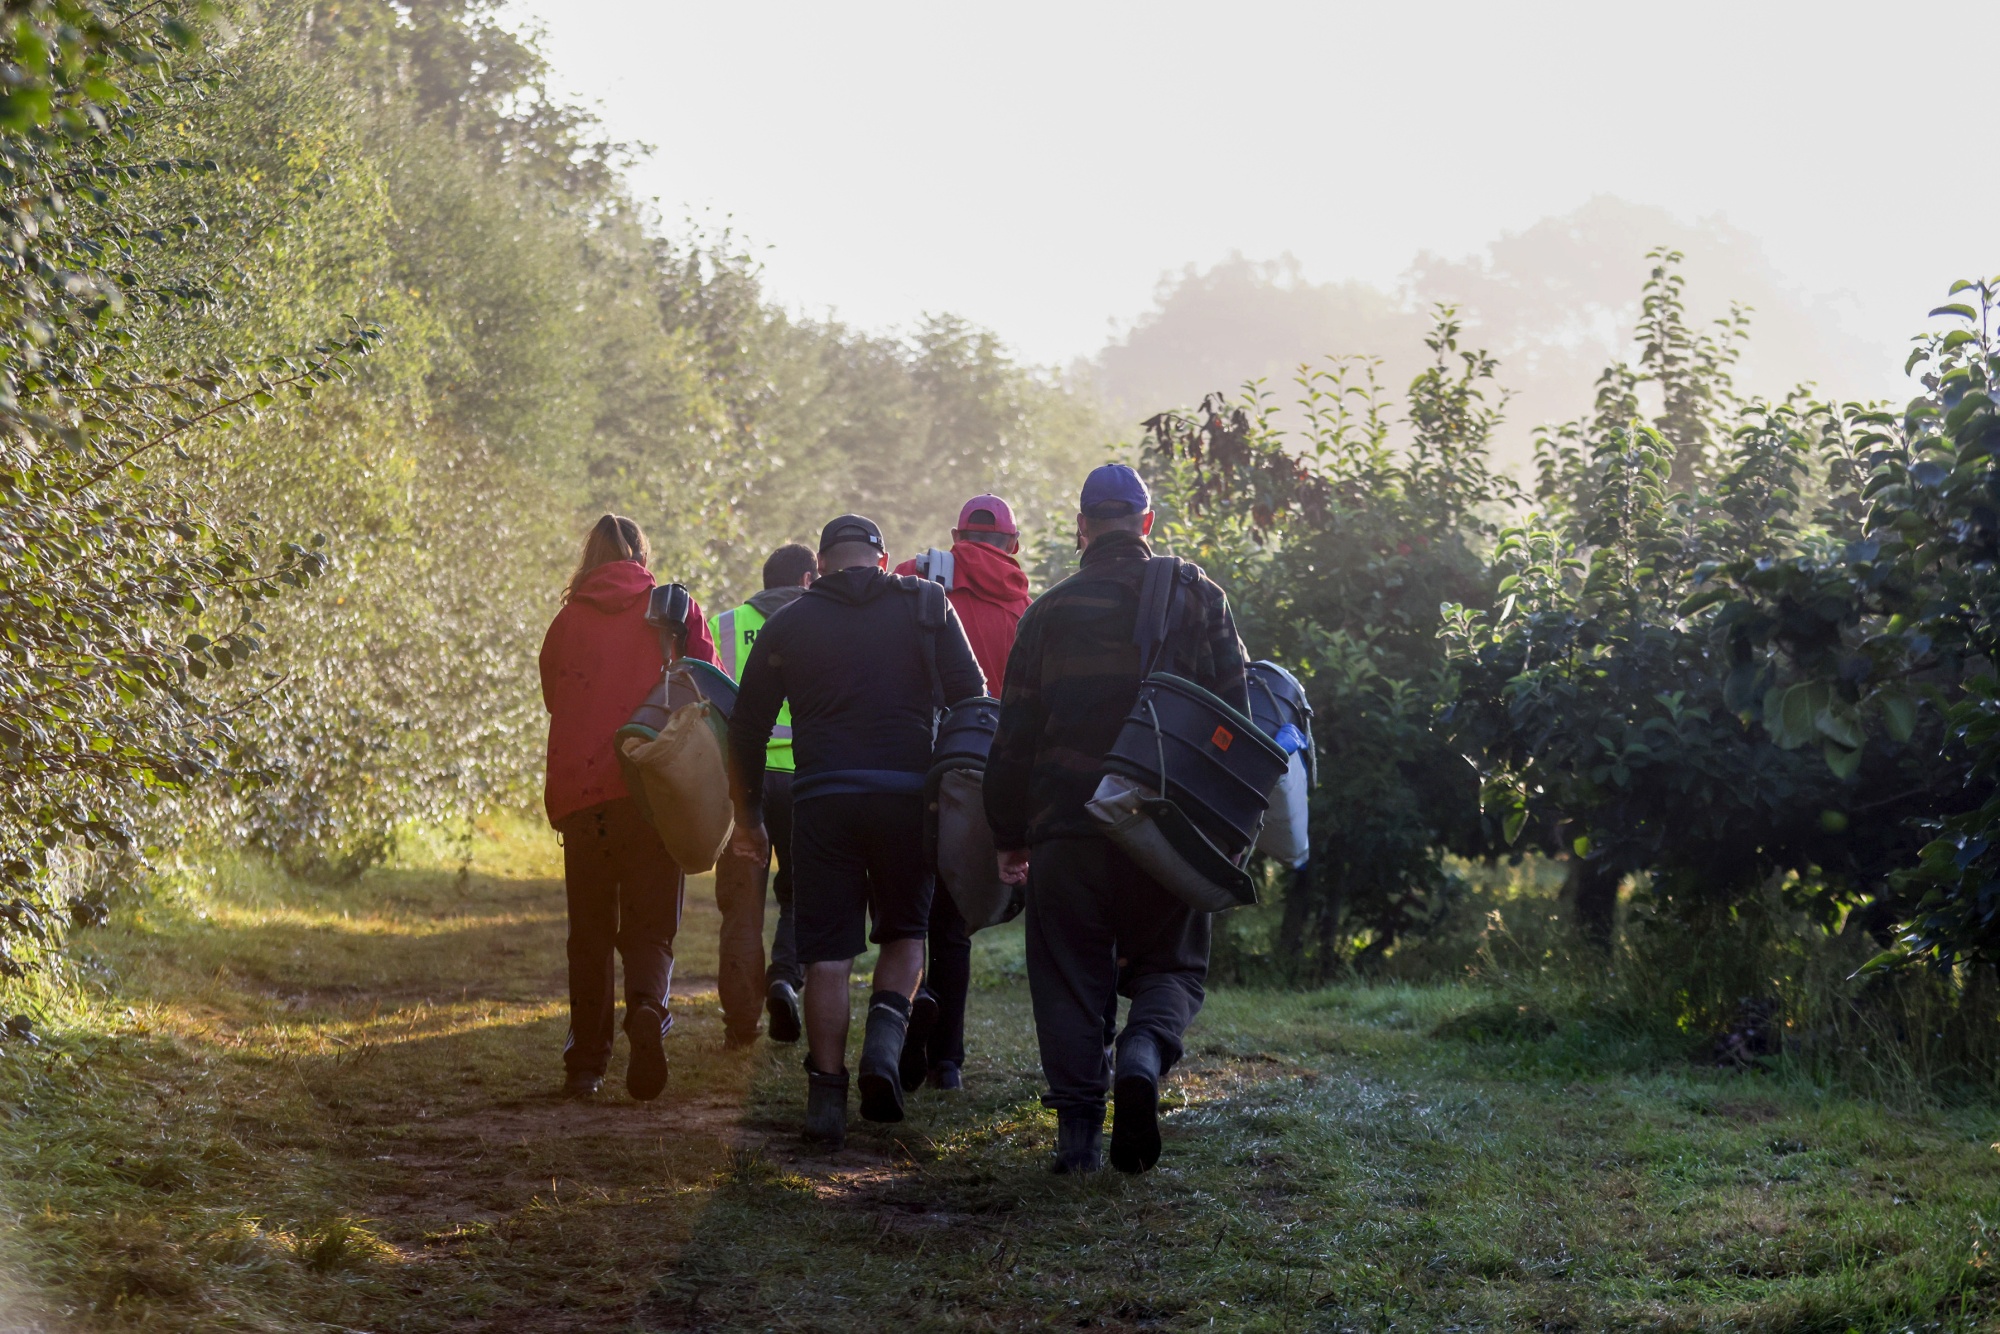 Fruit pickers make their way towards an orchard for an apple harvest in Coxheath, UK.